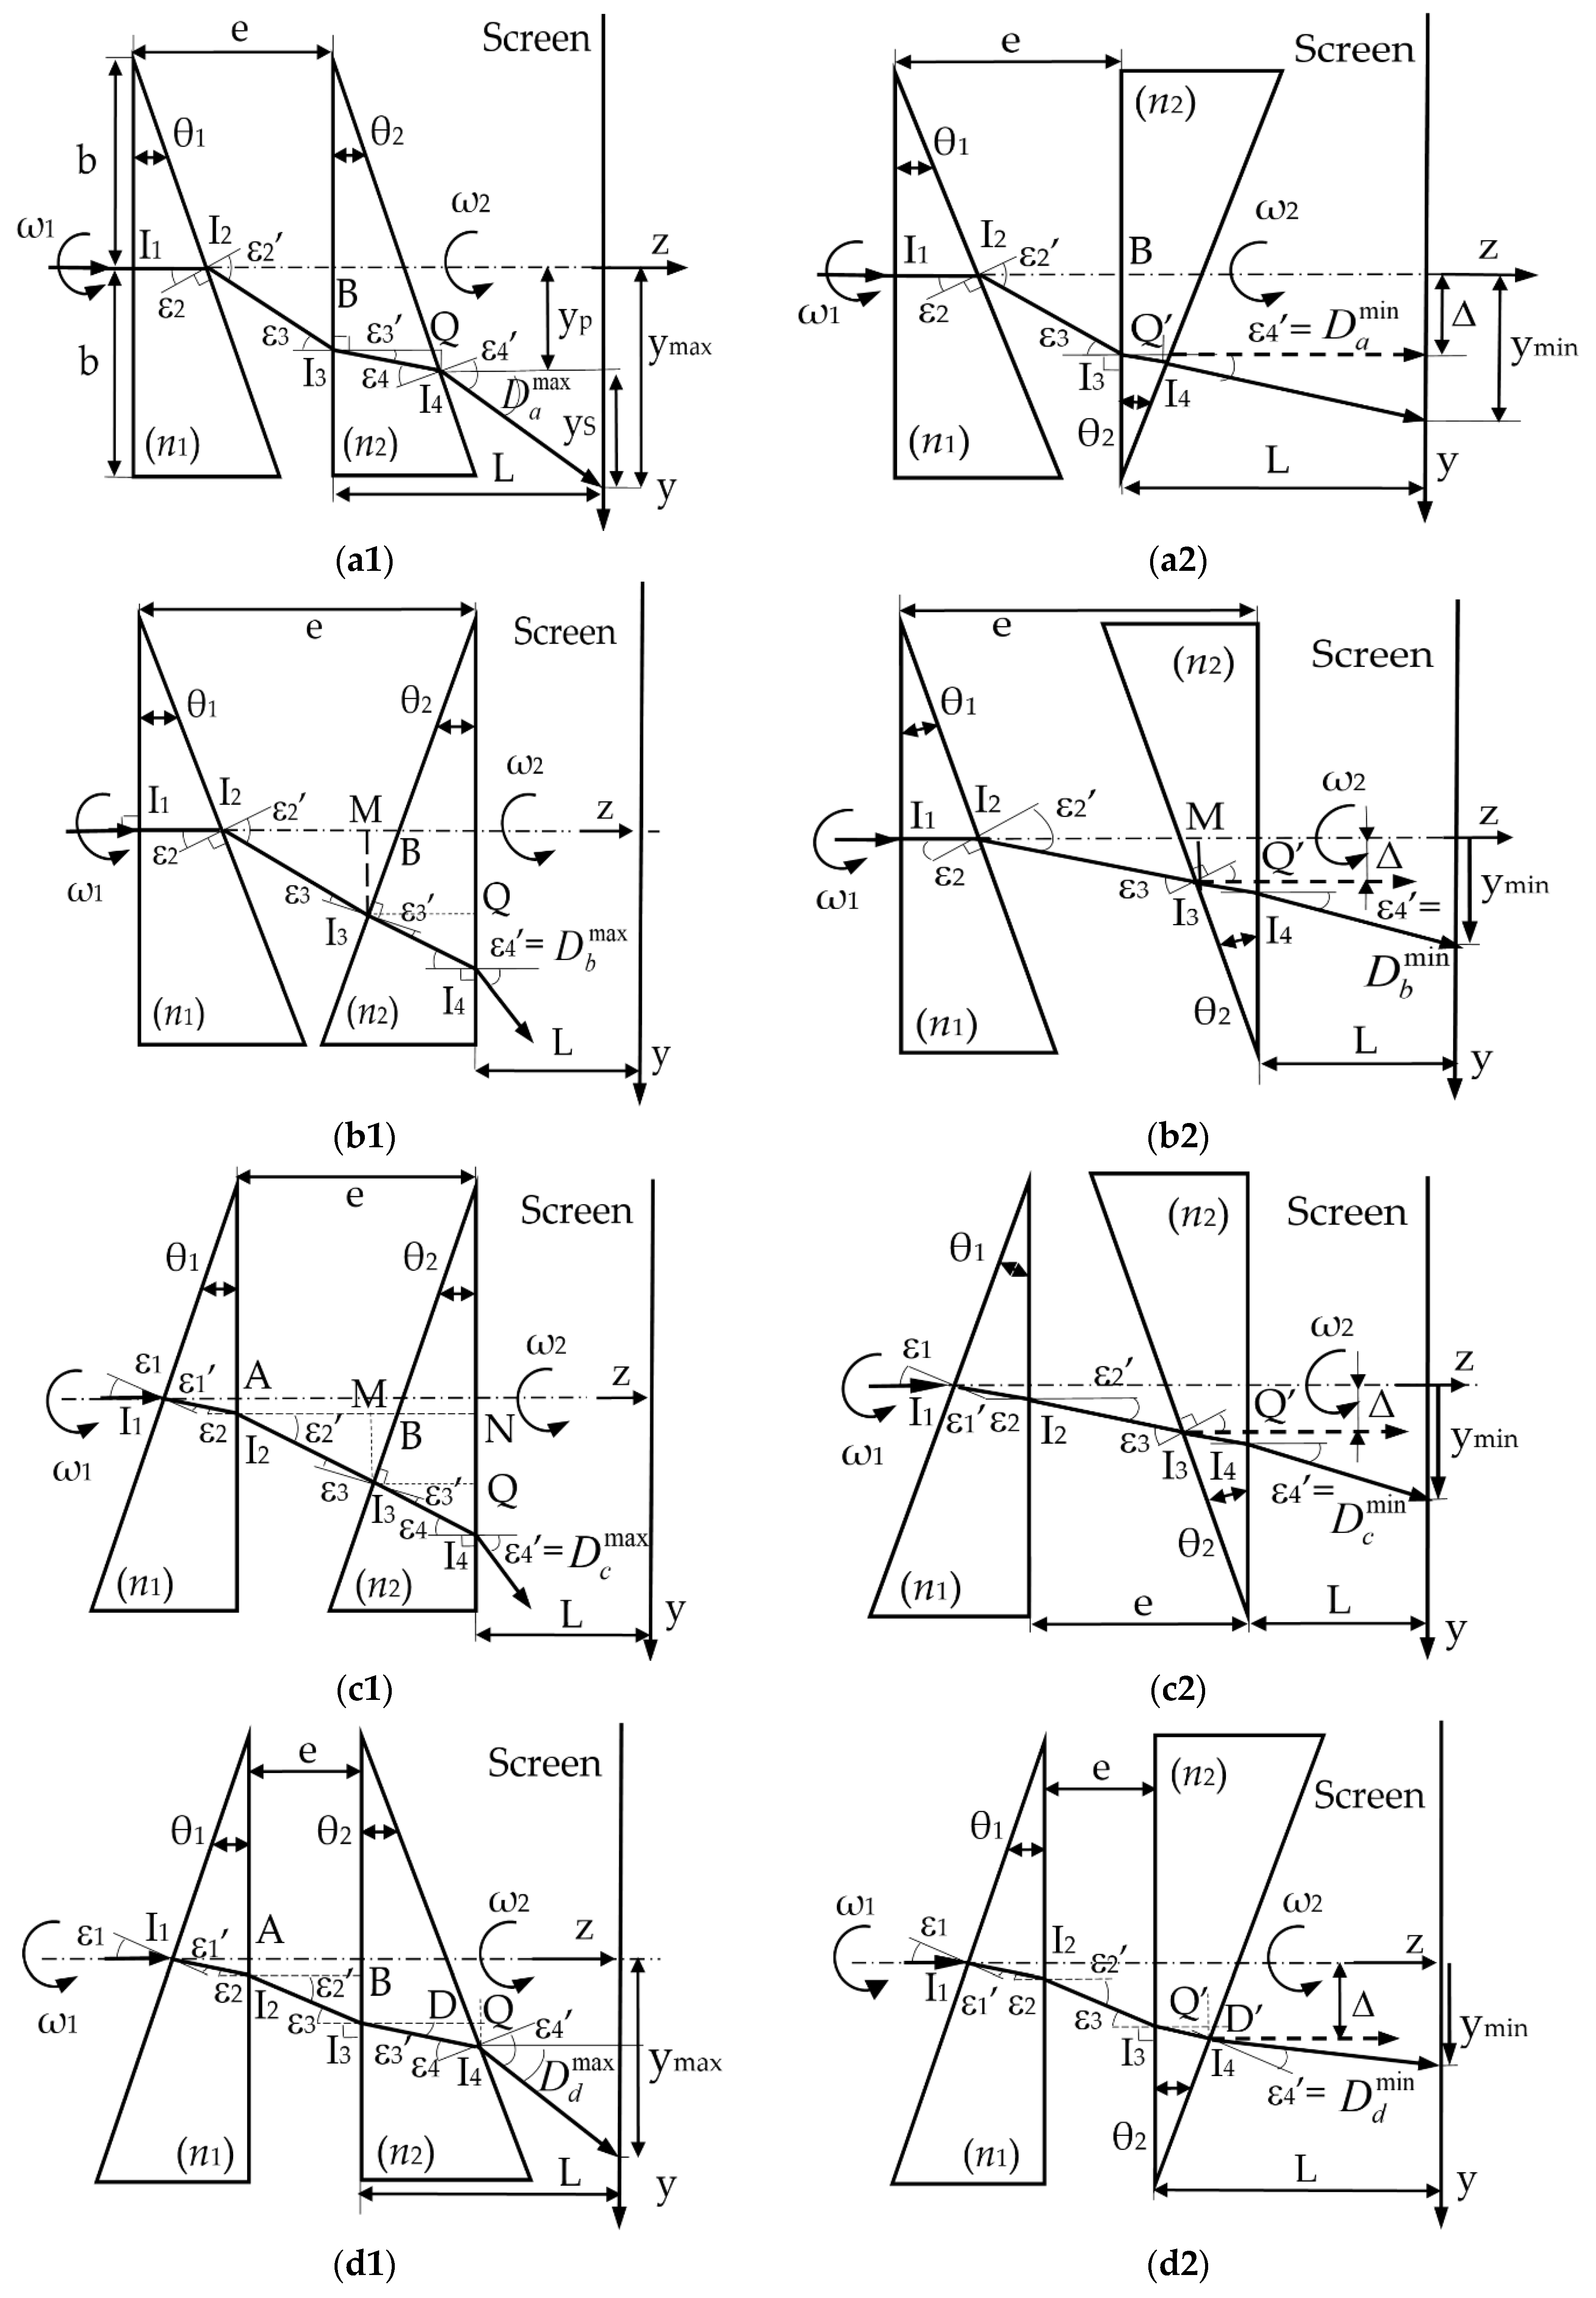 Applied Sciences | Free Full-Text | Exact Scan Patterns of Rotational  Risley Prisms Obtained with a Graphical Method: Multi-Parameter Analysis  and Design | HTML